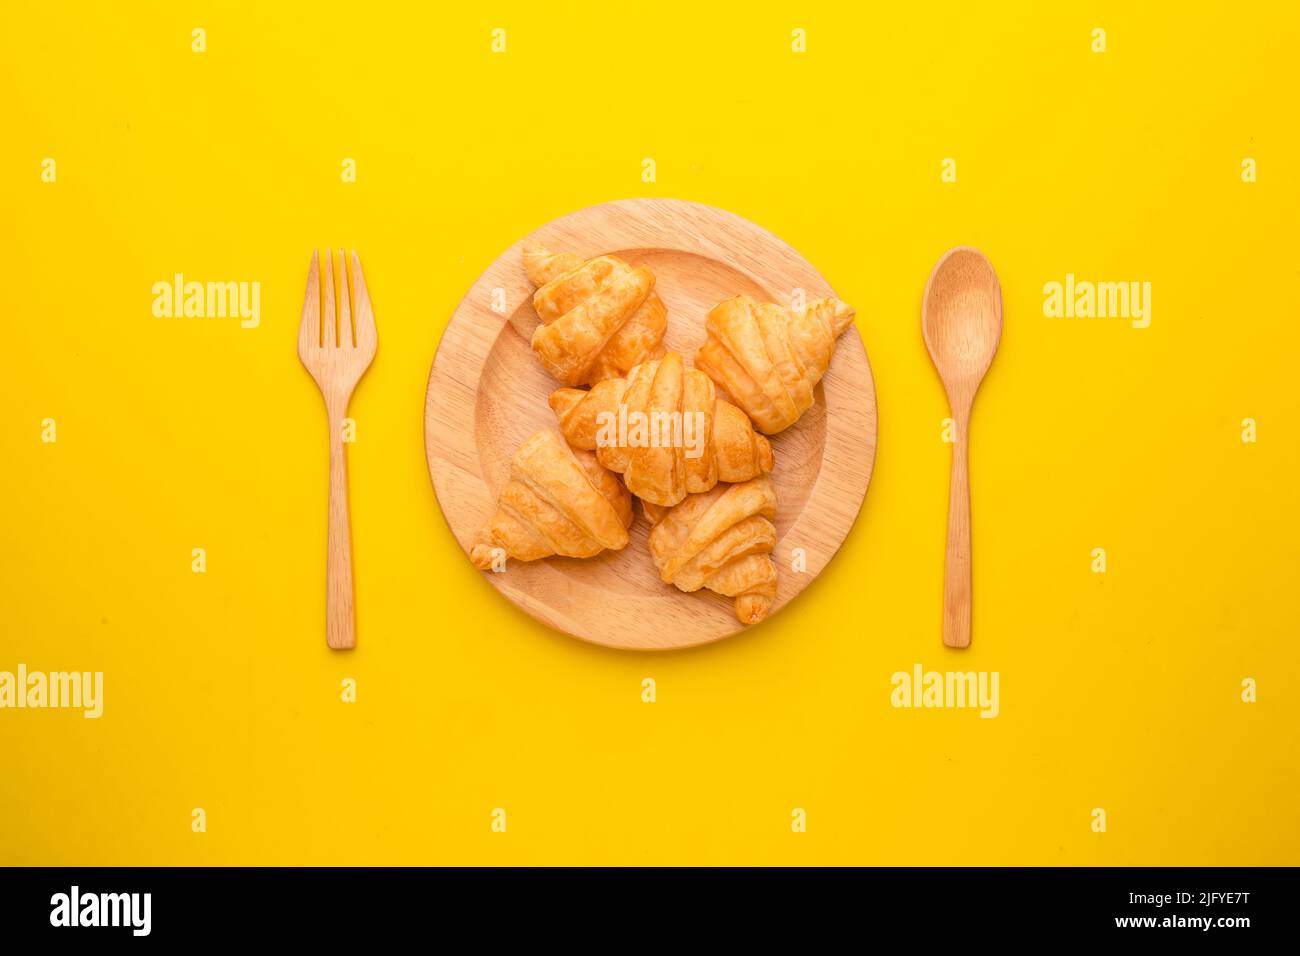 Top view mini Croissant in wooden dish on yellow background. Food concept with copy space Stock Photo